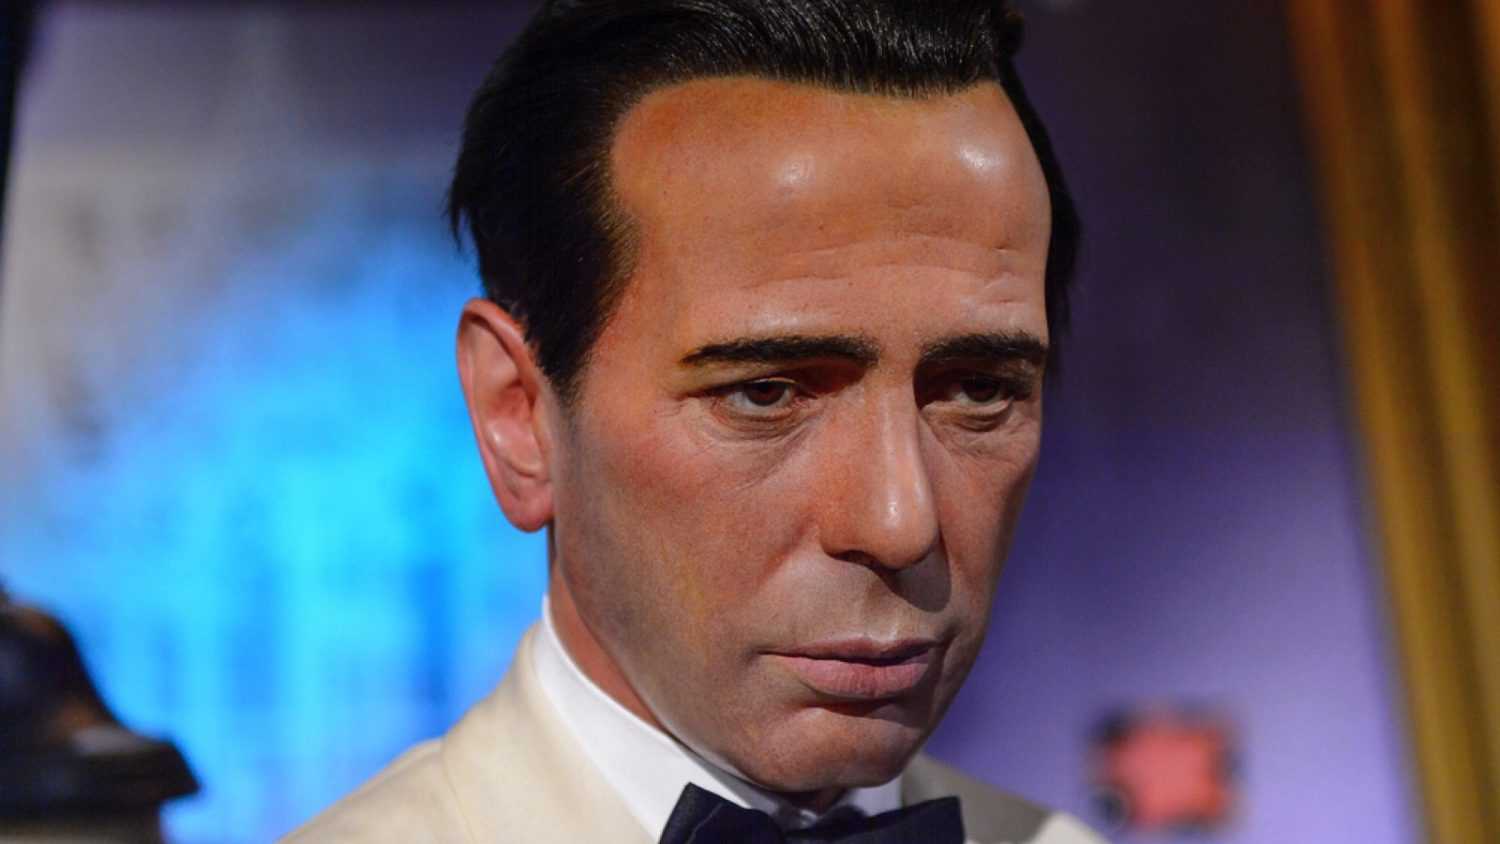 LONDON, ENGLAND - JULY 22, 2016: Humphrey Bogart, Madame Tussauds wax museum. It is a major tourist attraction in London